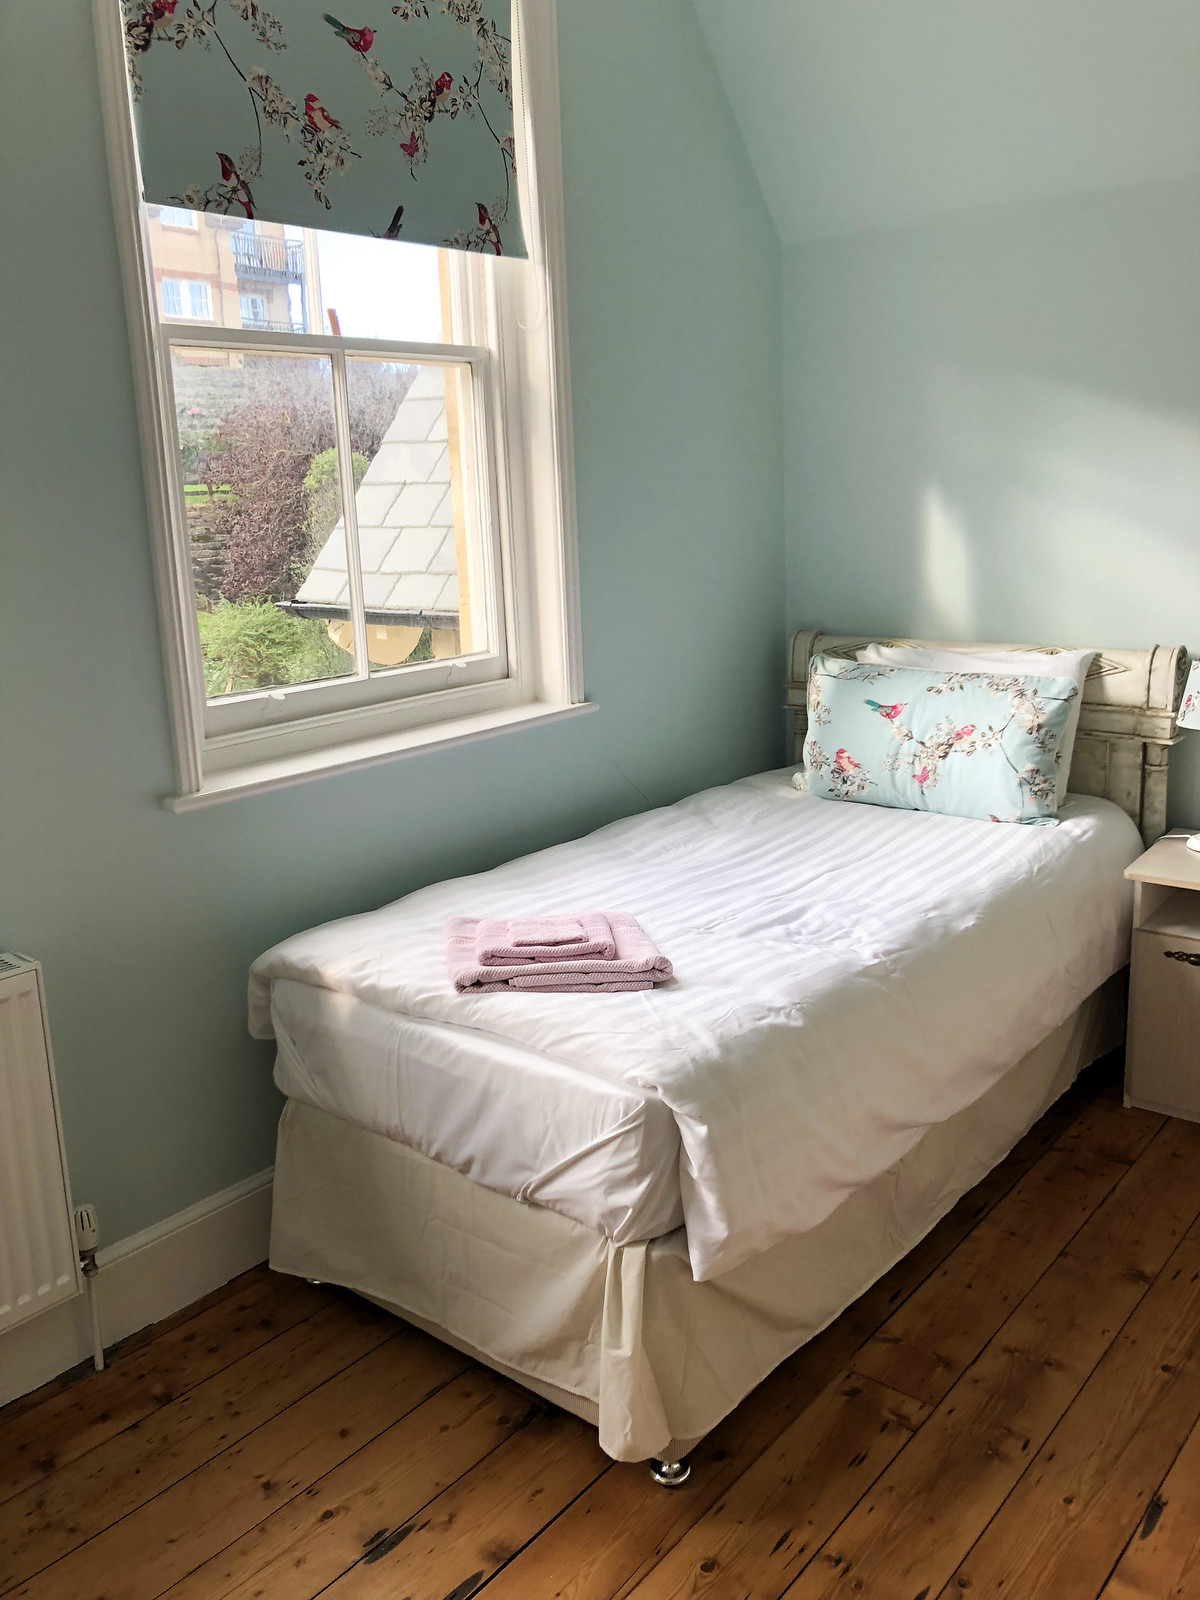 Merlin Court Bedroom: My Detox Retreat Weight Loss Experience at Slimmeria | Not Dressed As Lamb